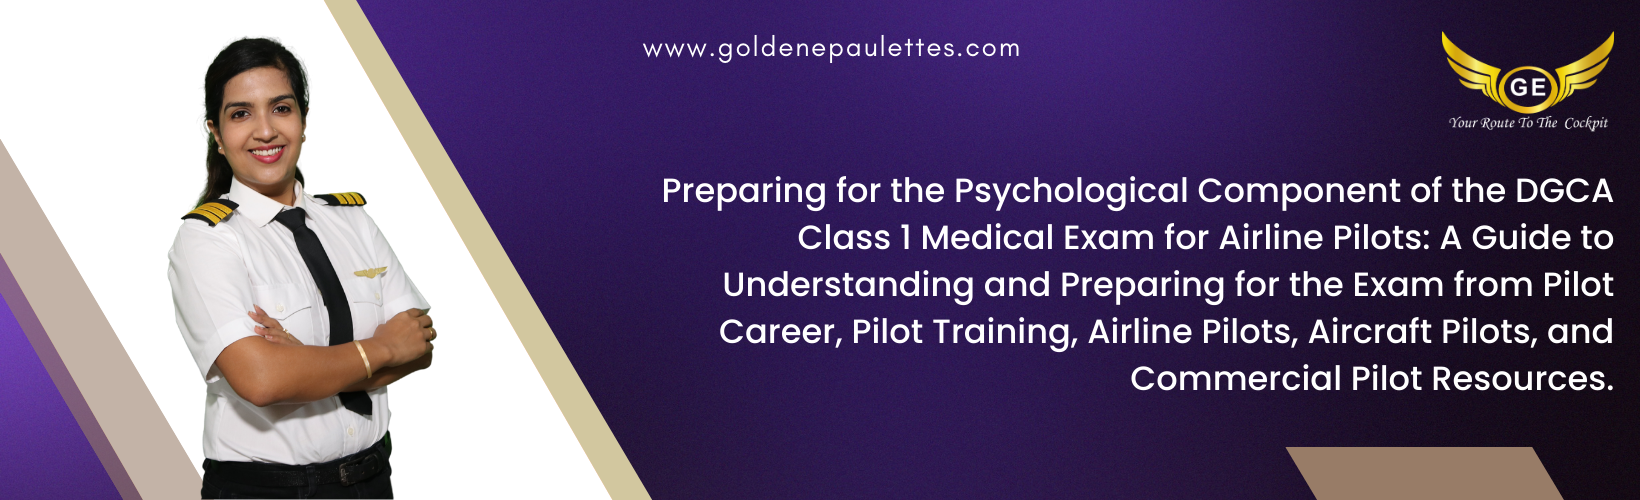 How to Prepare for the Psychological Component of the DGCA Class 1 Medical Exam for Airline Pilots